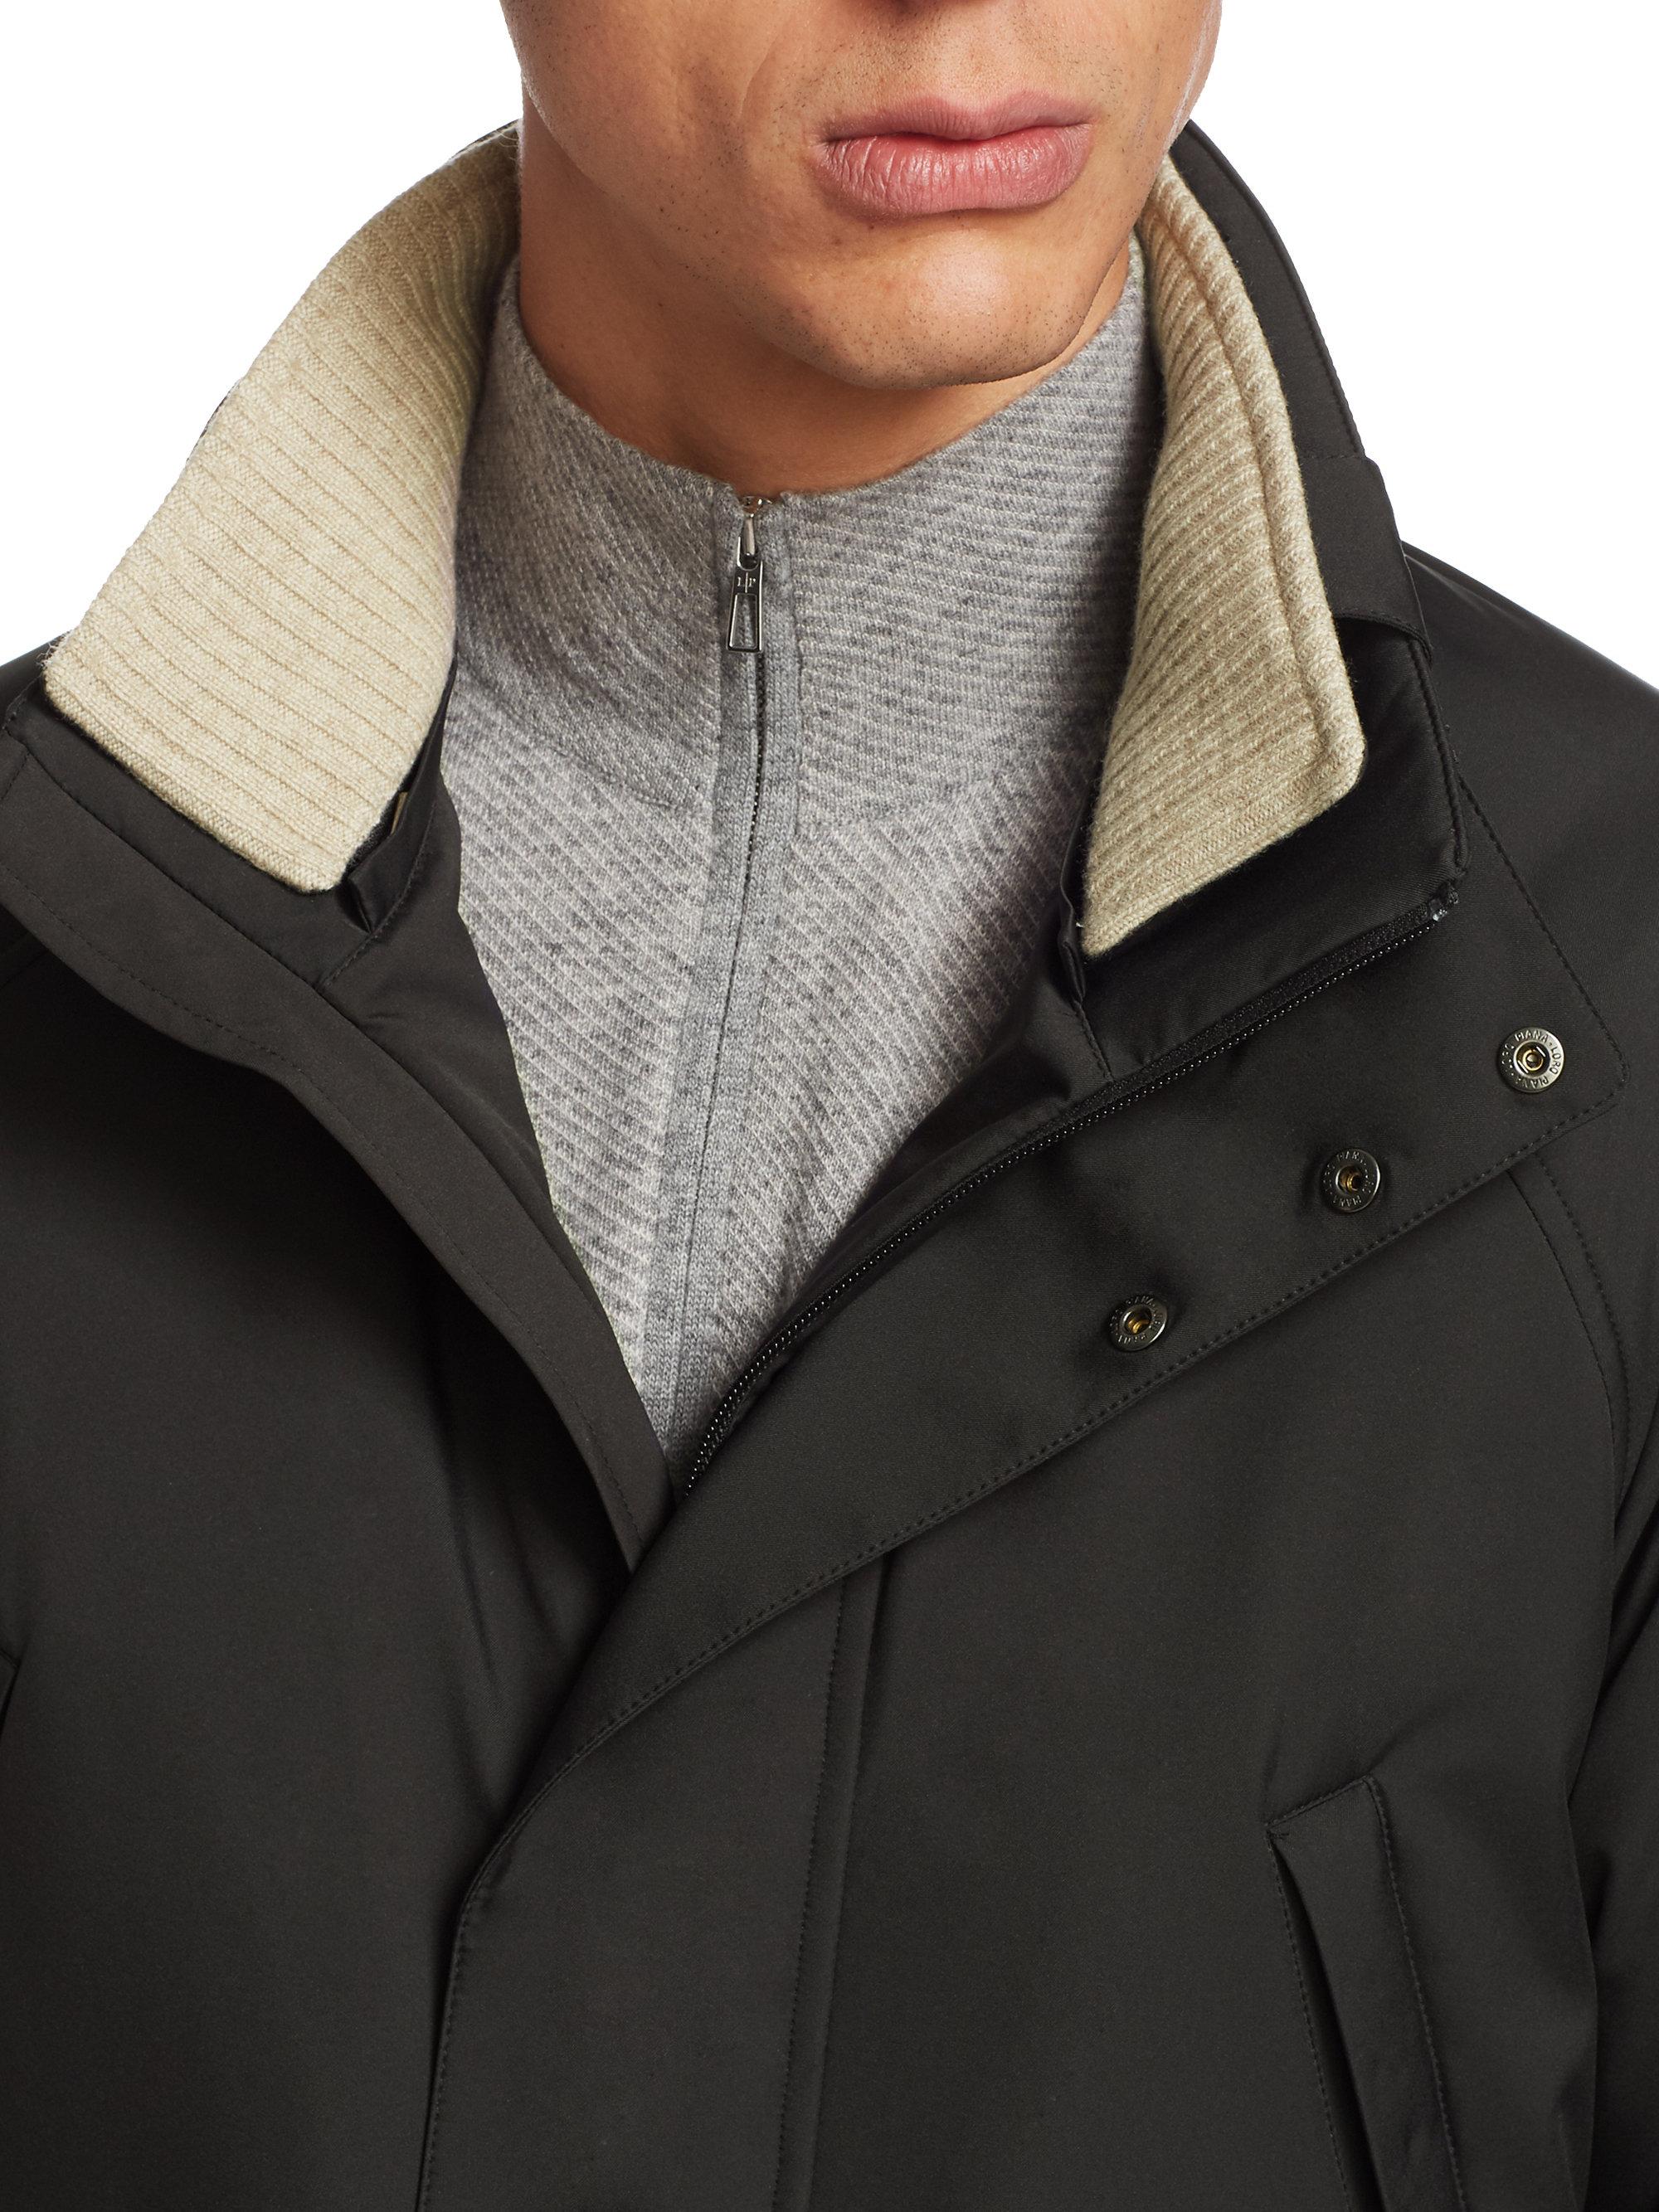 Loro Piana Synthetic Wind Icer Classic Ski Jacket in Onyx (Black) for Men - Lyst